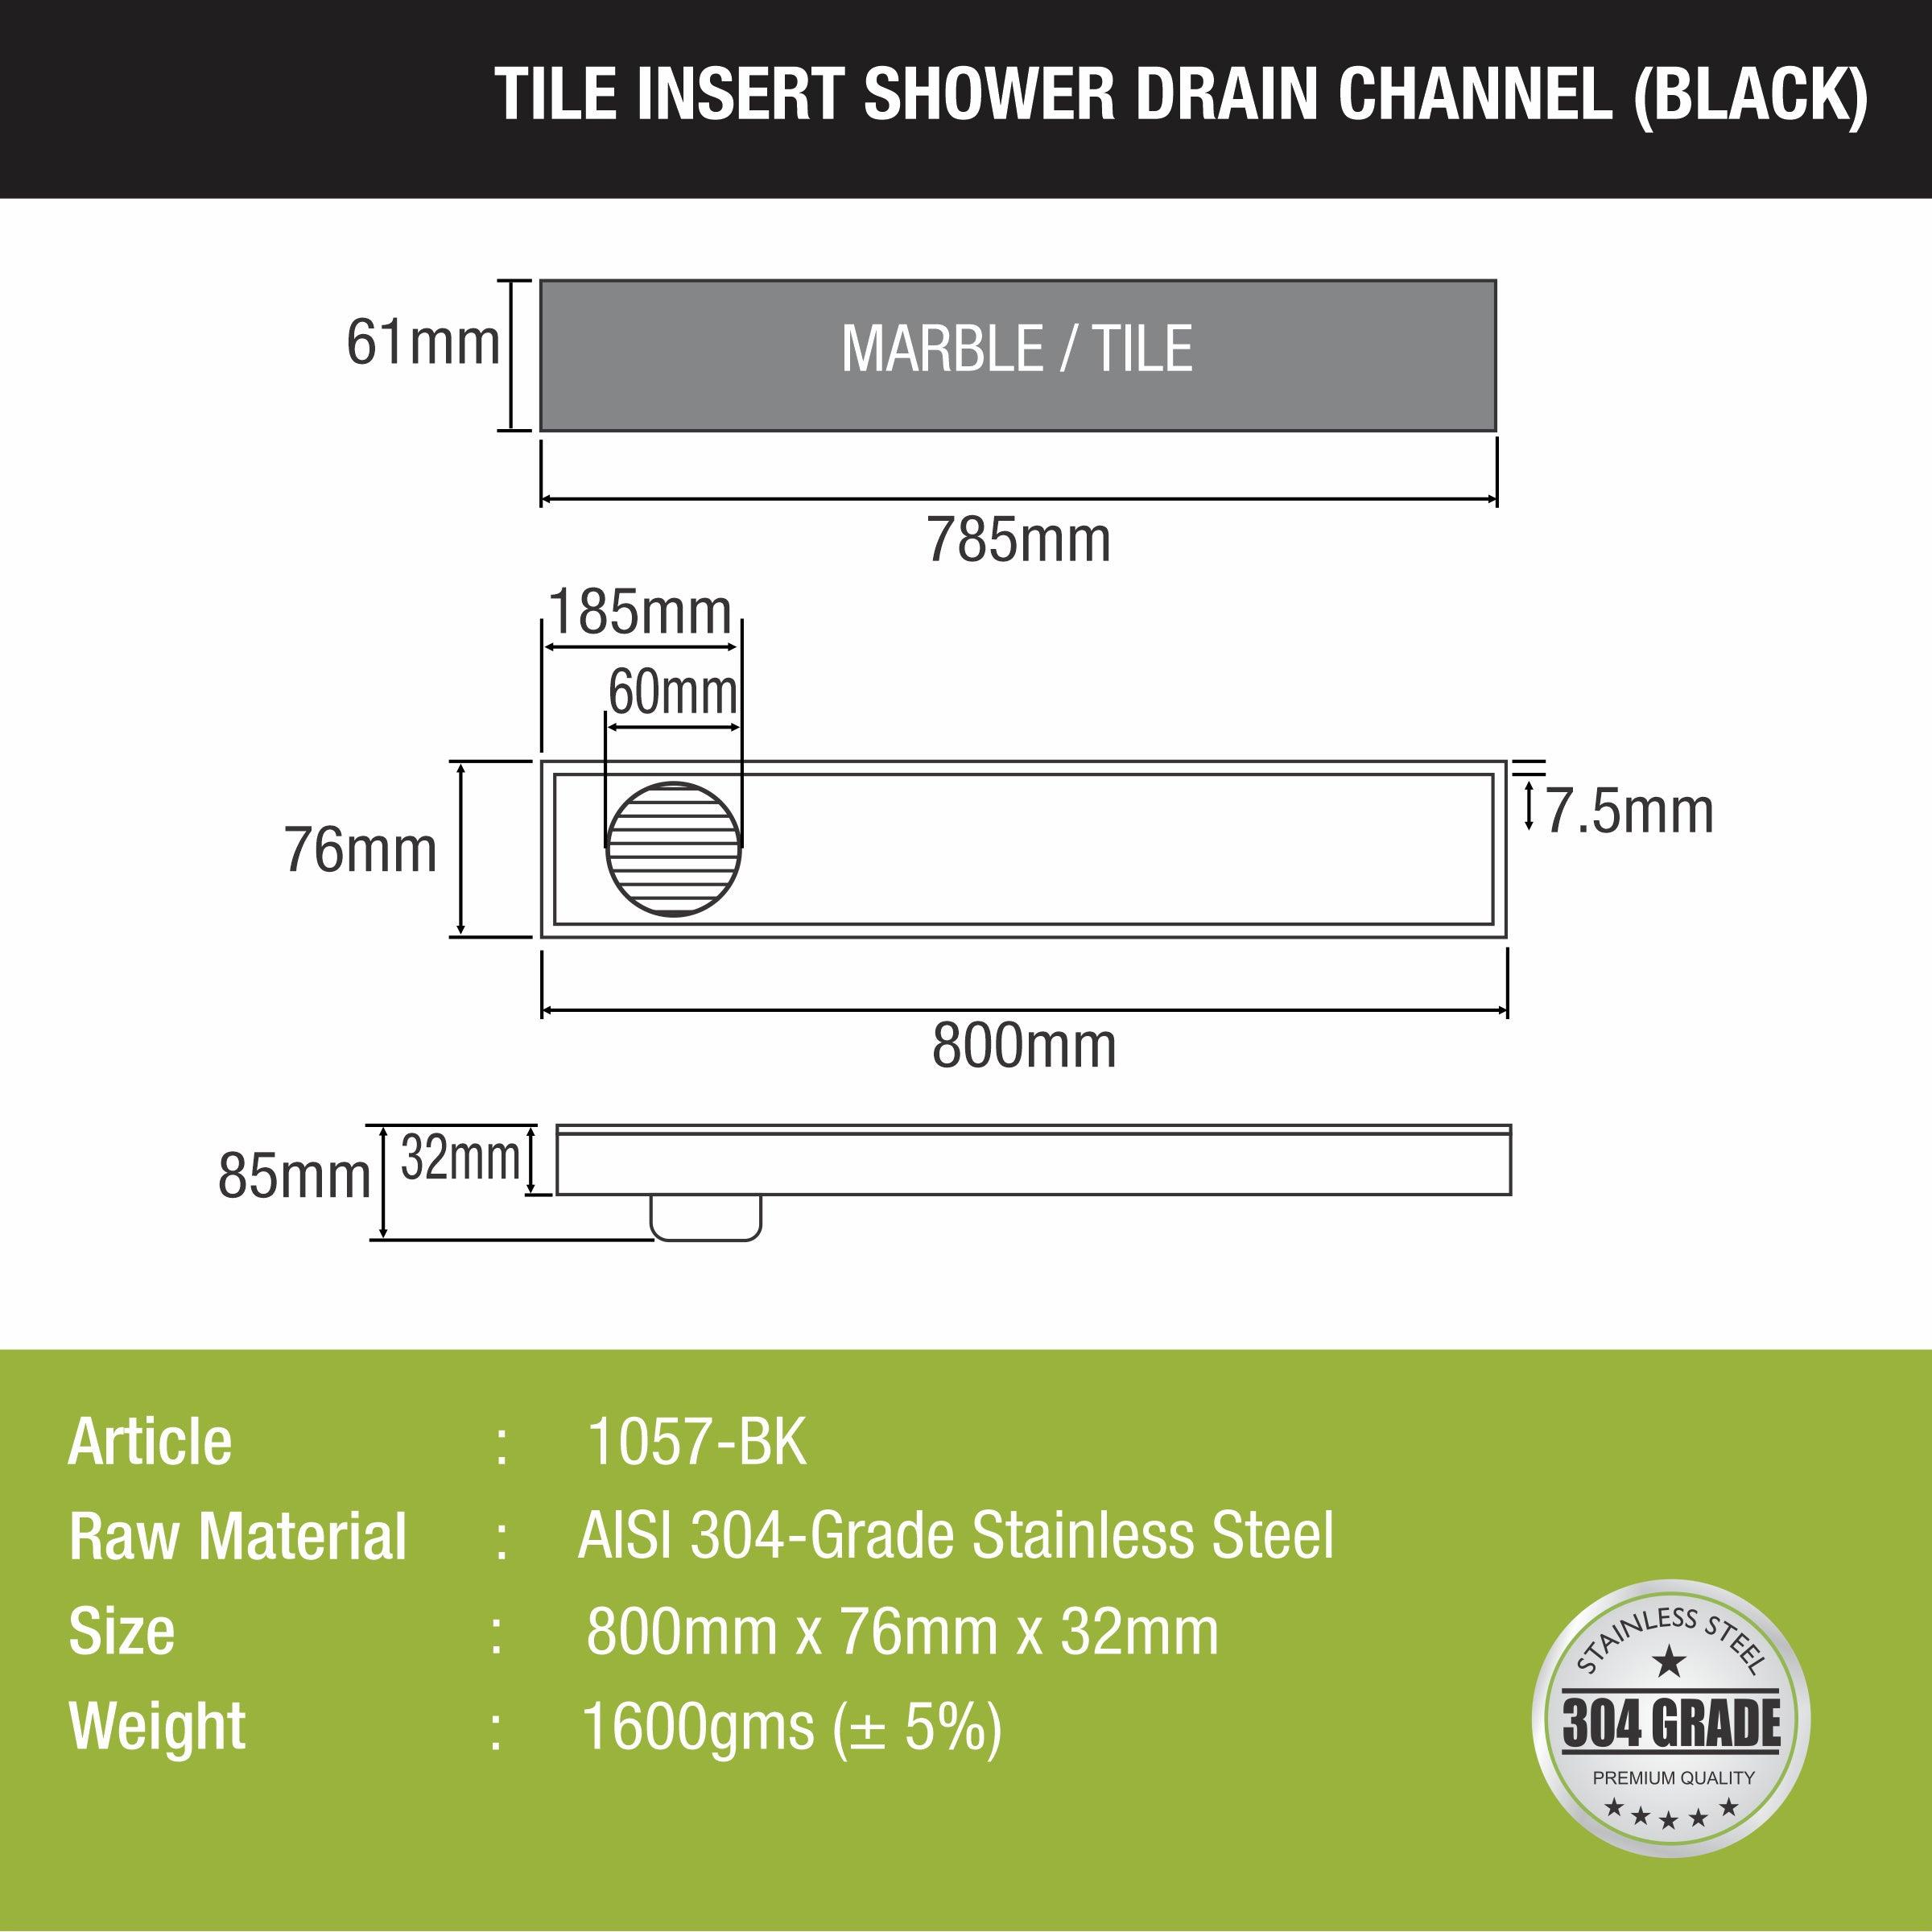 Tile Insert Shower Drain Channel - Black (32 x 3 Inches) size and measurement